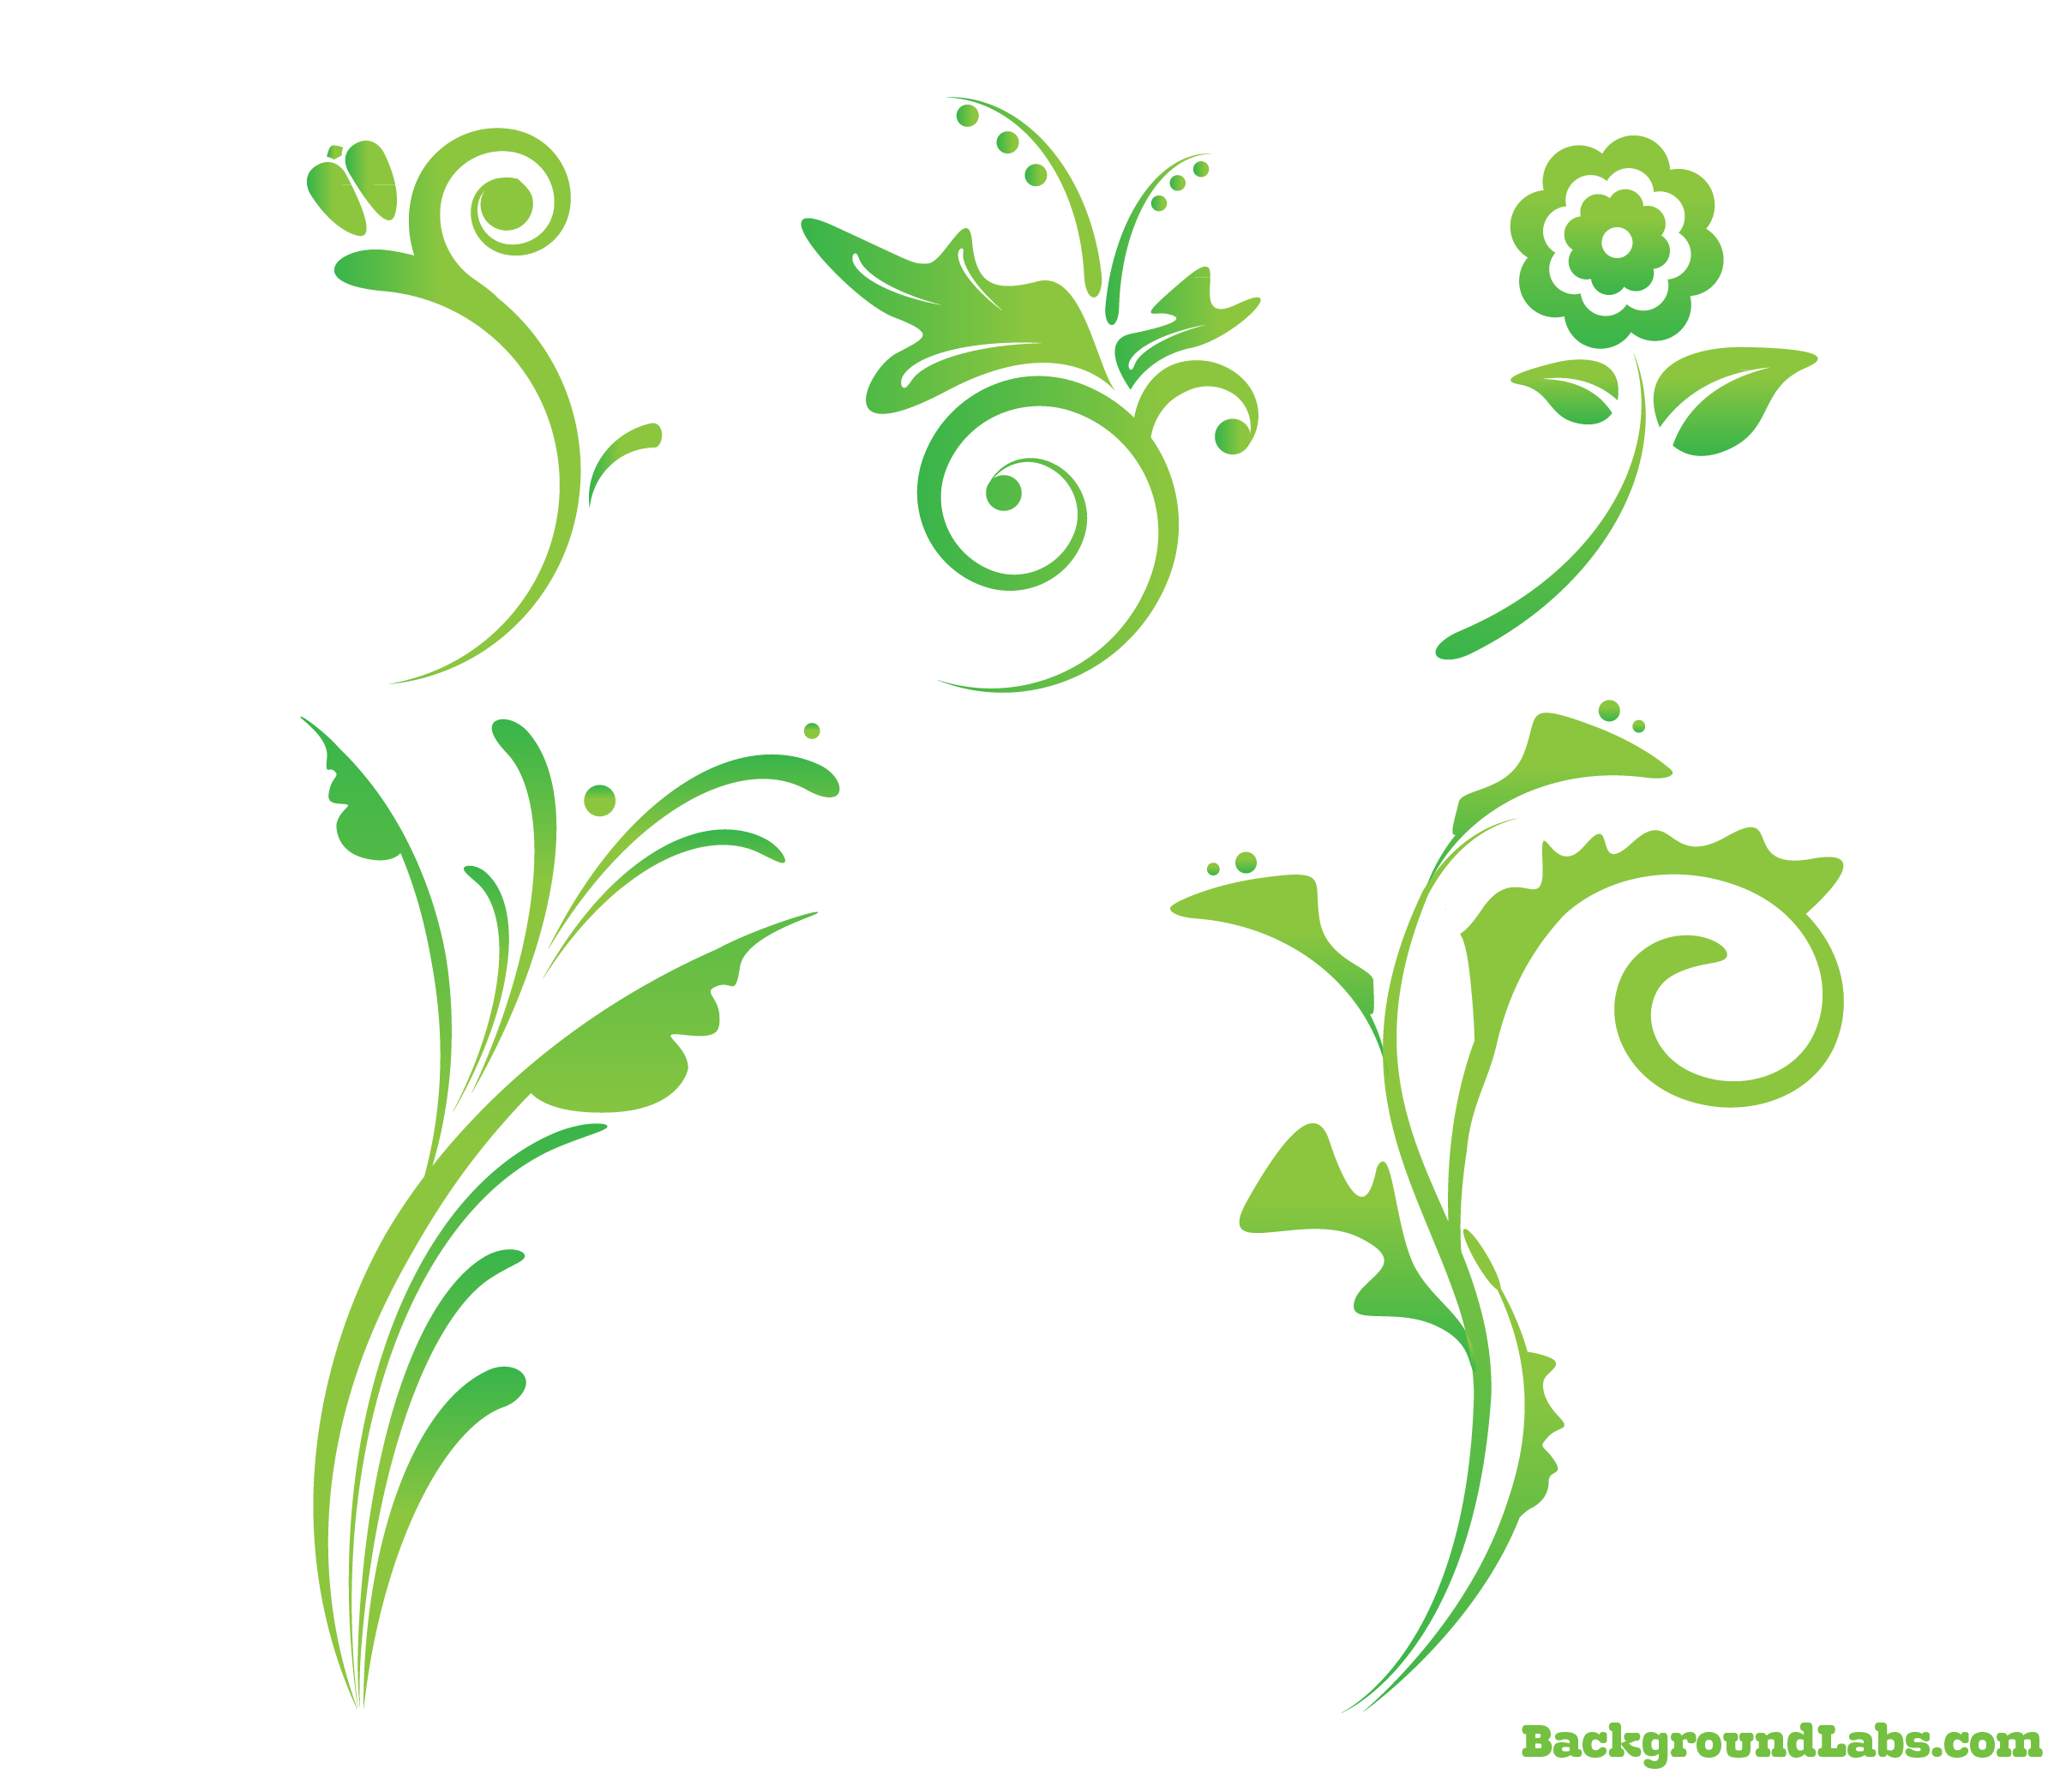 free vector clipart flowers - photo #26